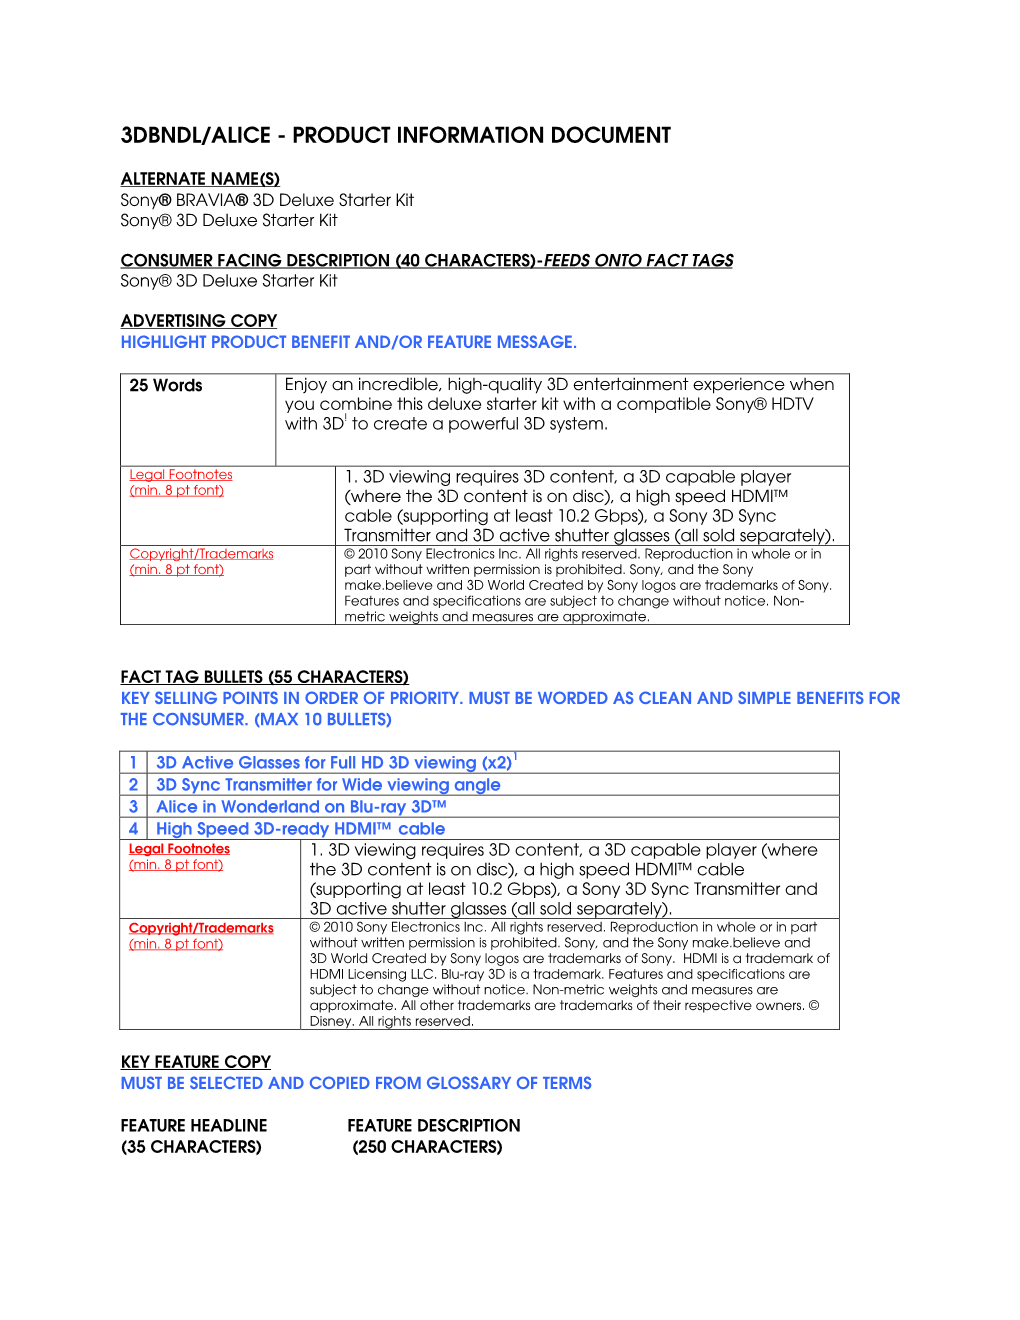 3Dbndl/Alice - Product Information Document